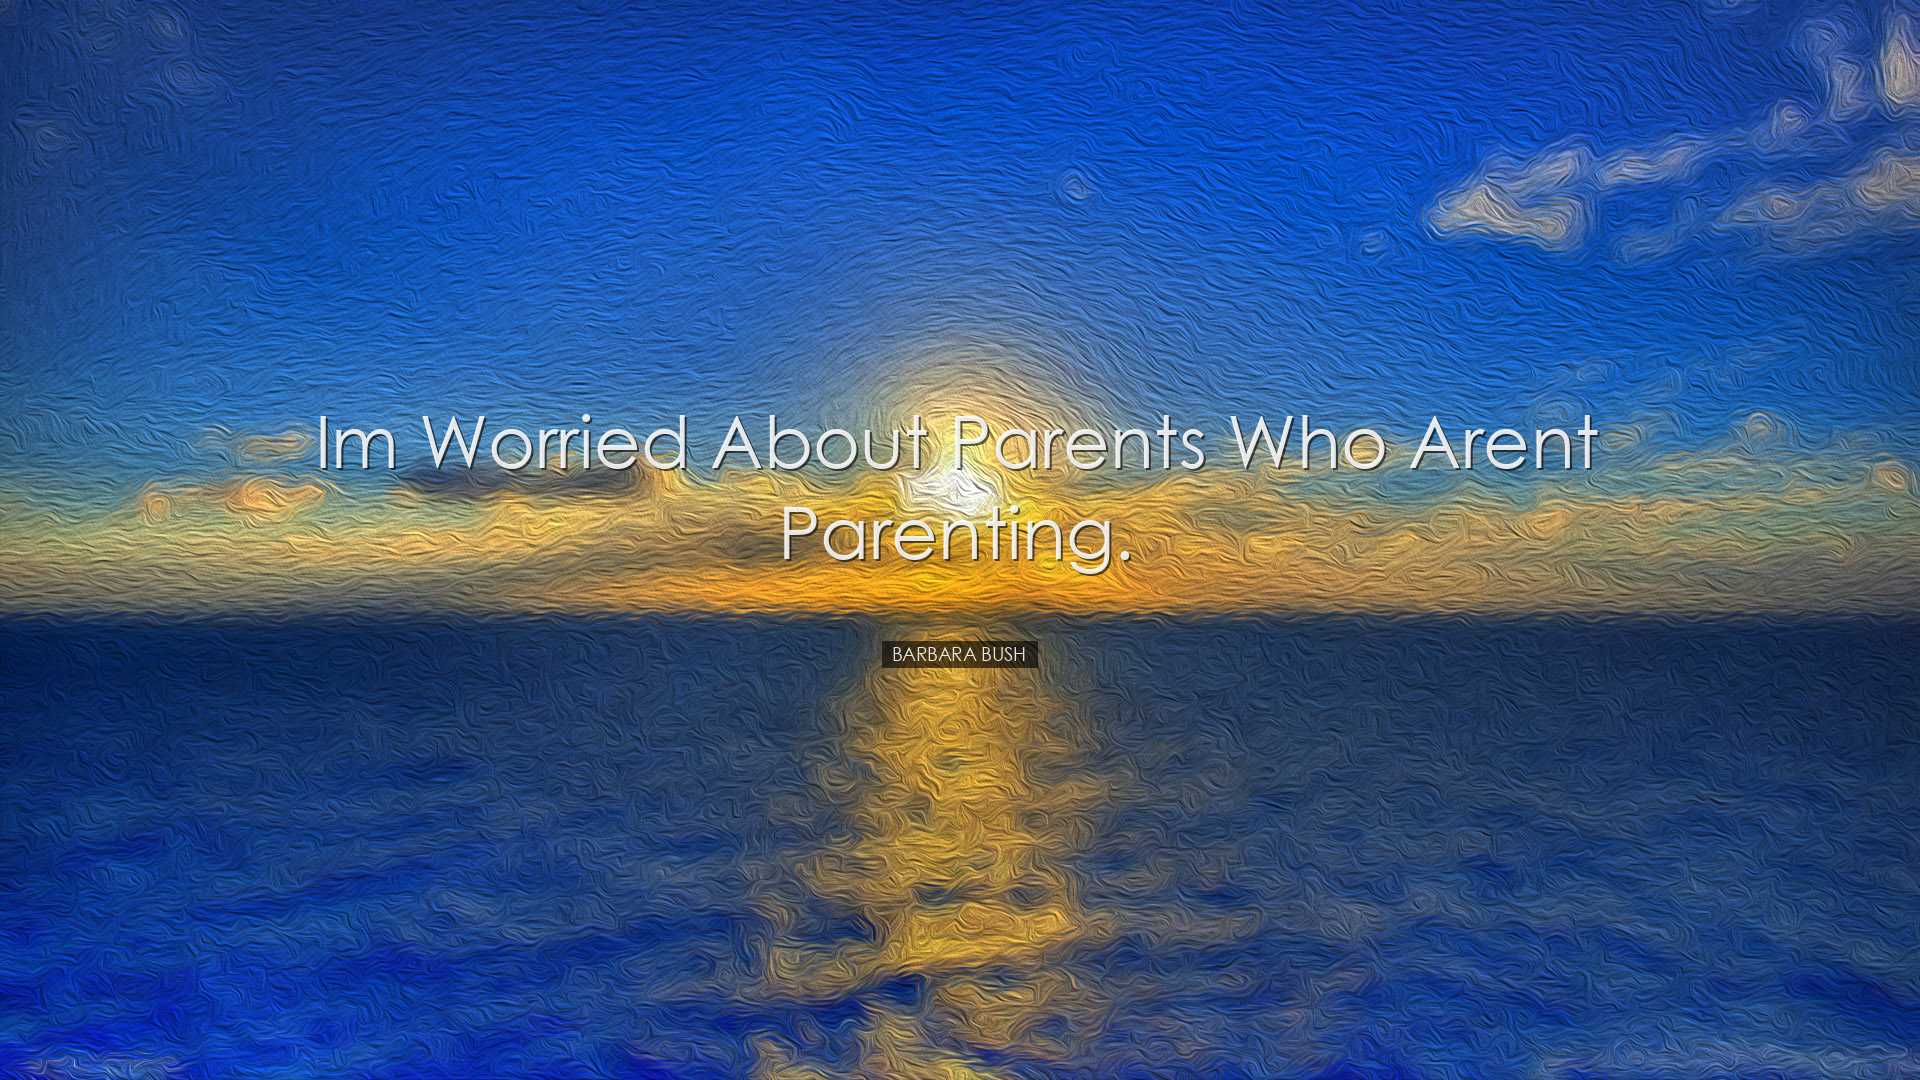 Im worried about parents who arent parenting. - Barbara Bush